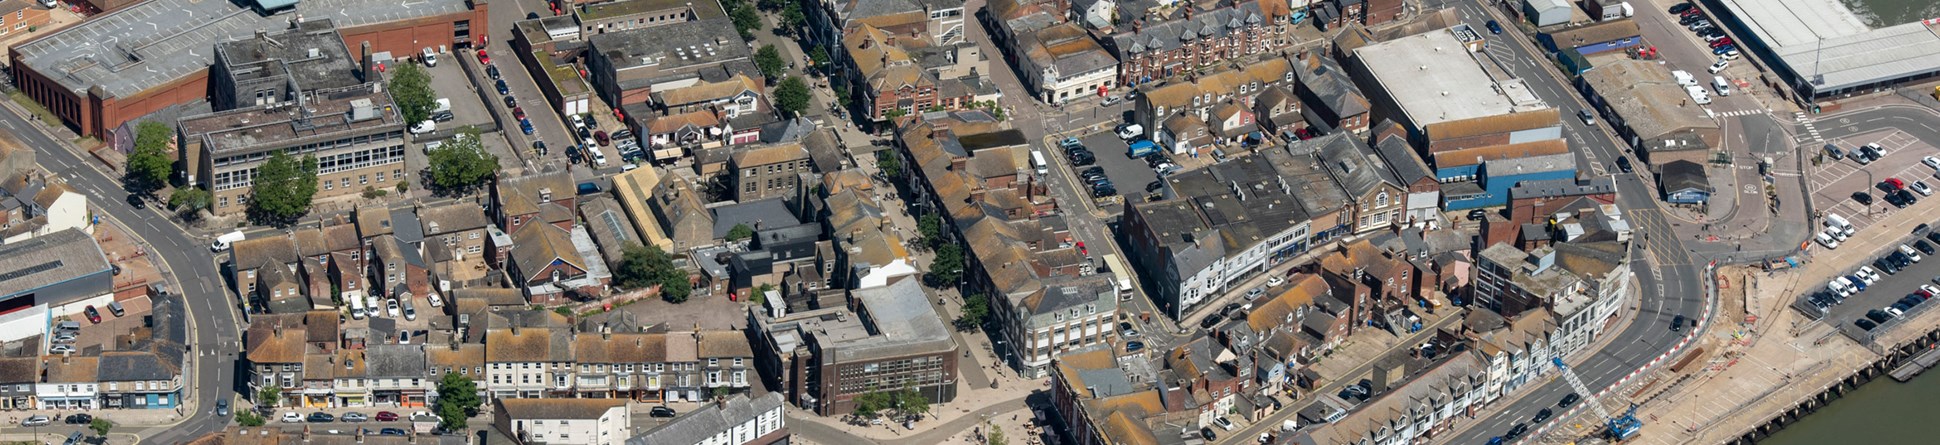 Aerial view of Lowestoft town with dock areas bottom right and top right.